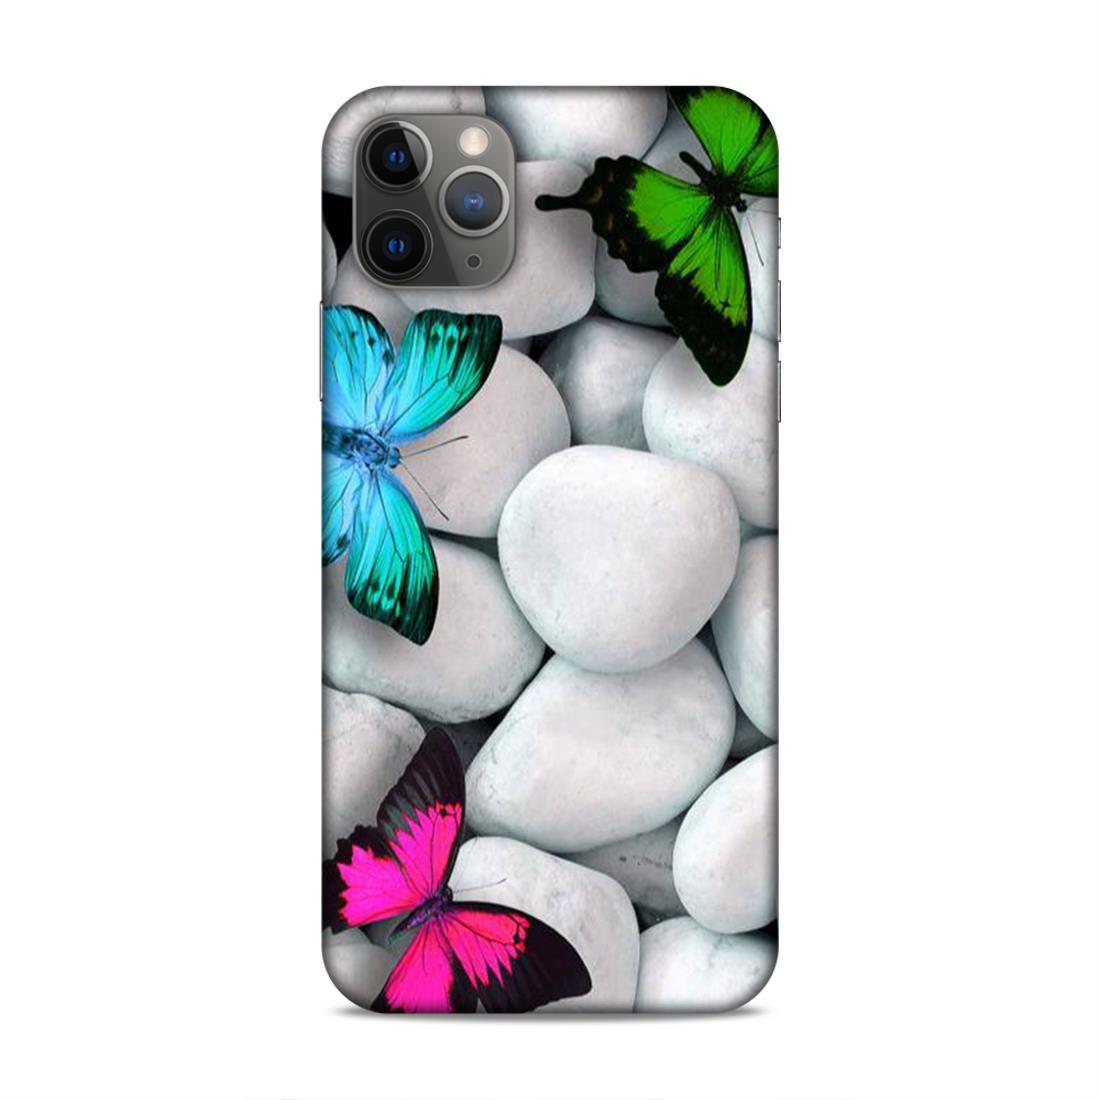 White Stone iPhone 11 Pro Max Phone Case Cover